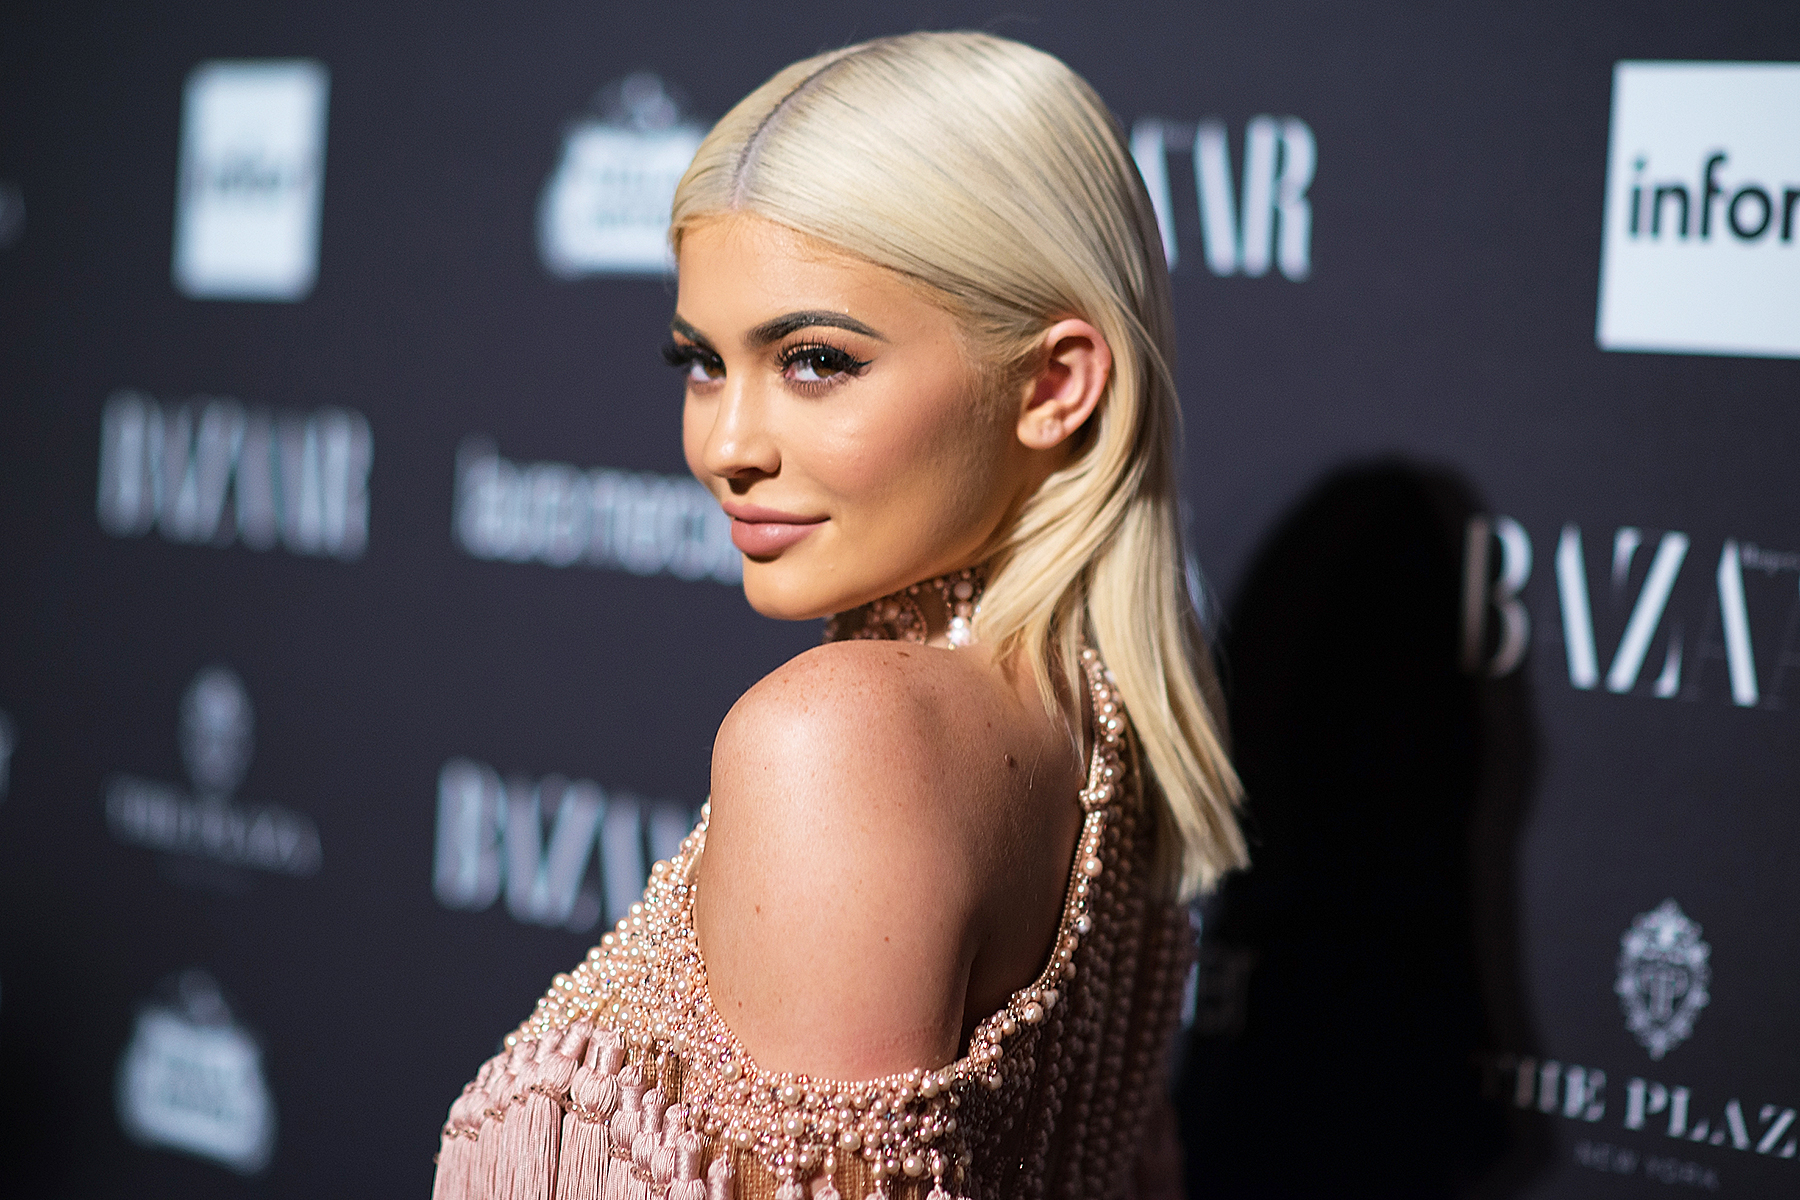 Mose Skygge Kommerciel Kylie Jenner Hides Baby Bump in Calvin Klein Ad, Twitter Reacts